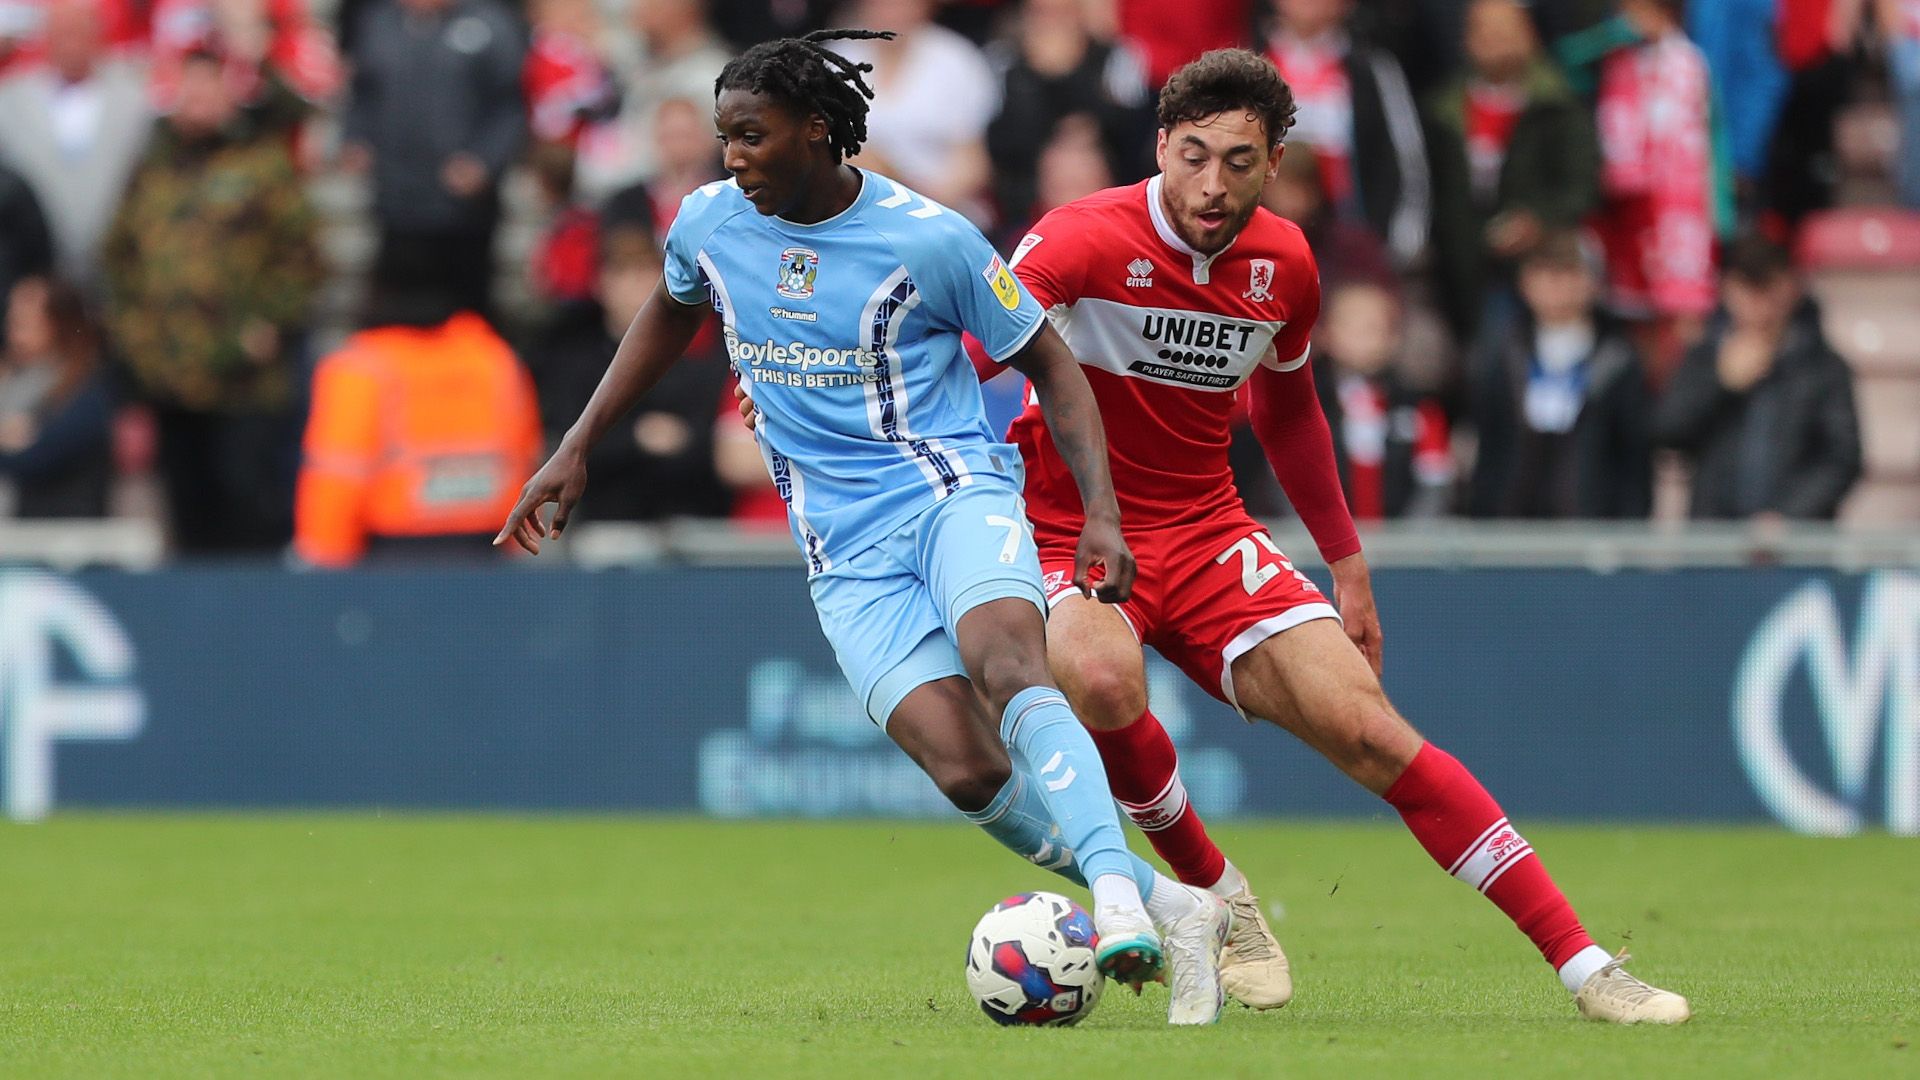 Coventry vs Middlesbrough live stream: how to watch the playoff semi ...